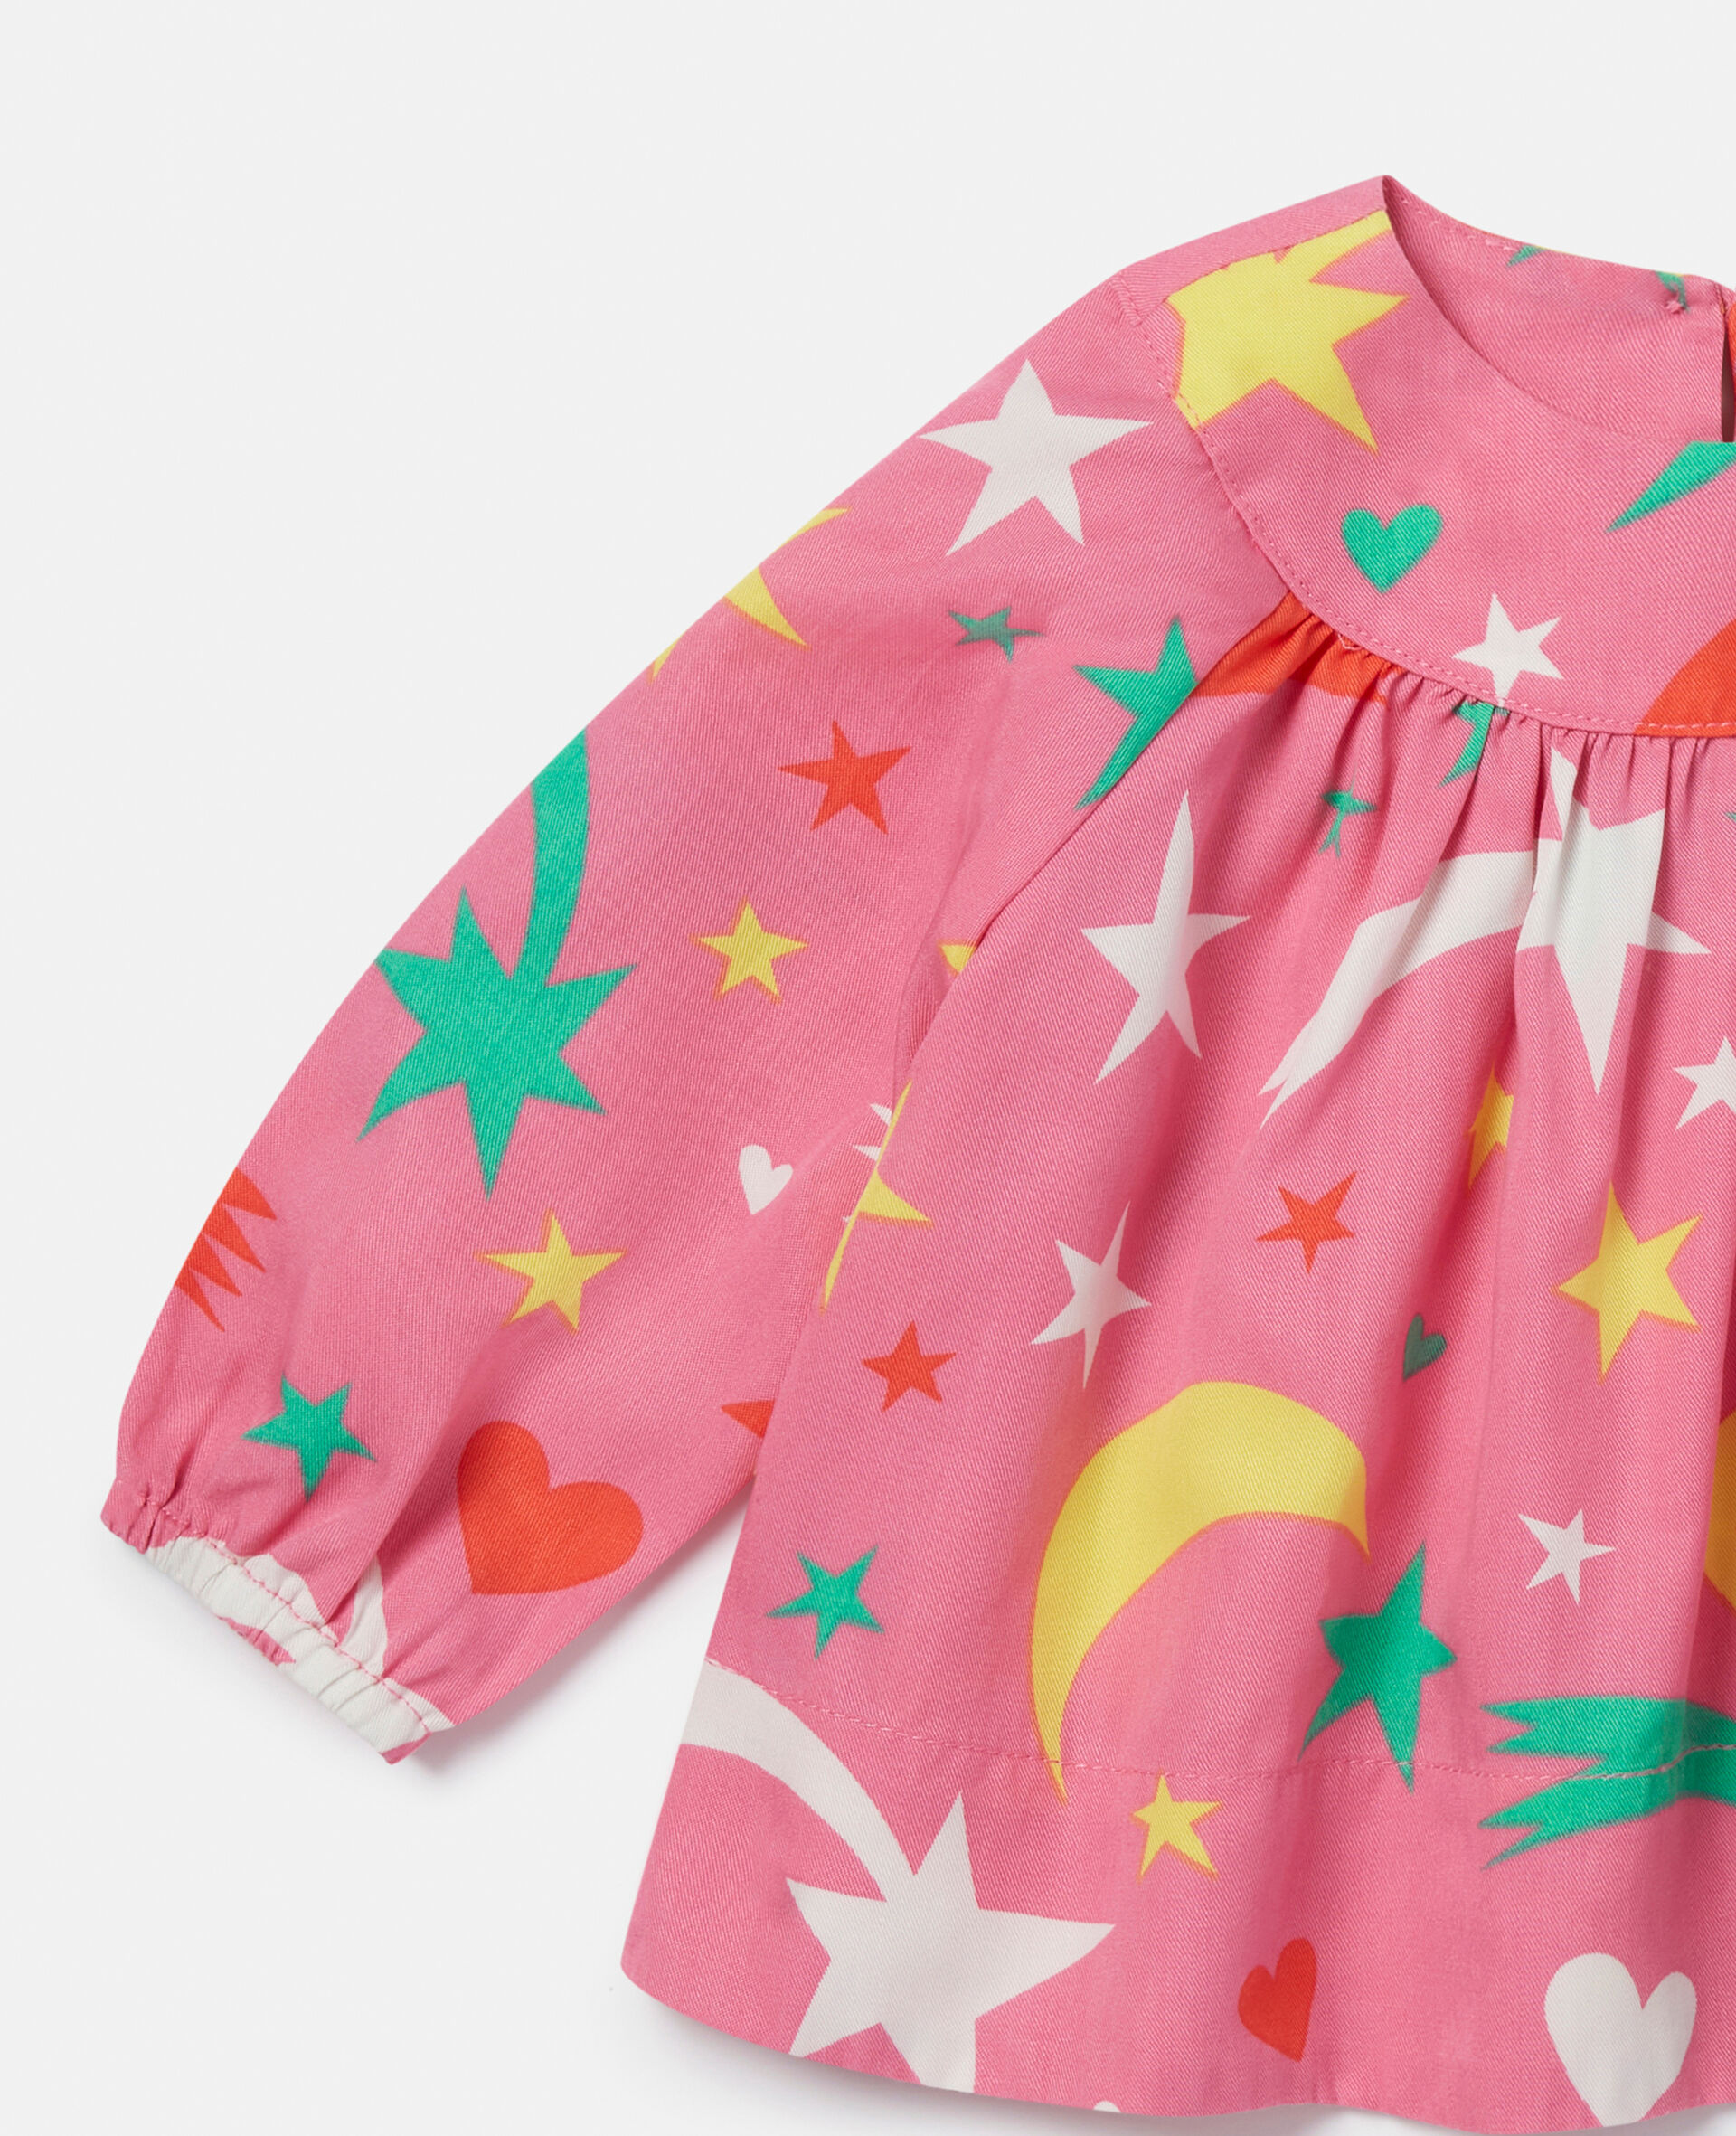 Shooting Star Print Twill Top-Pink-large image number 1